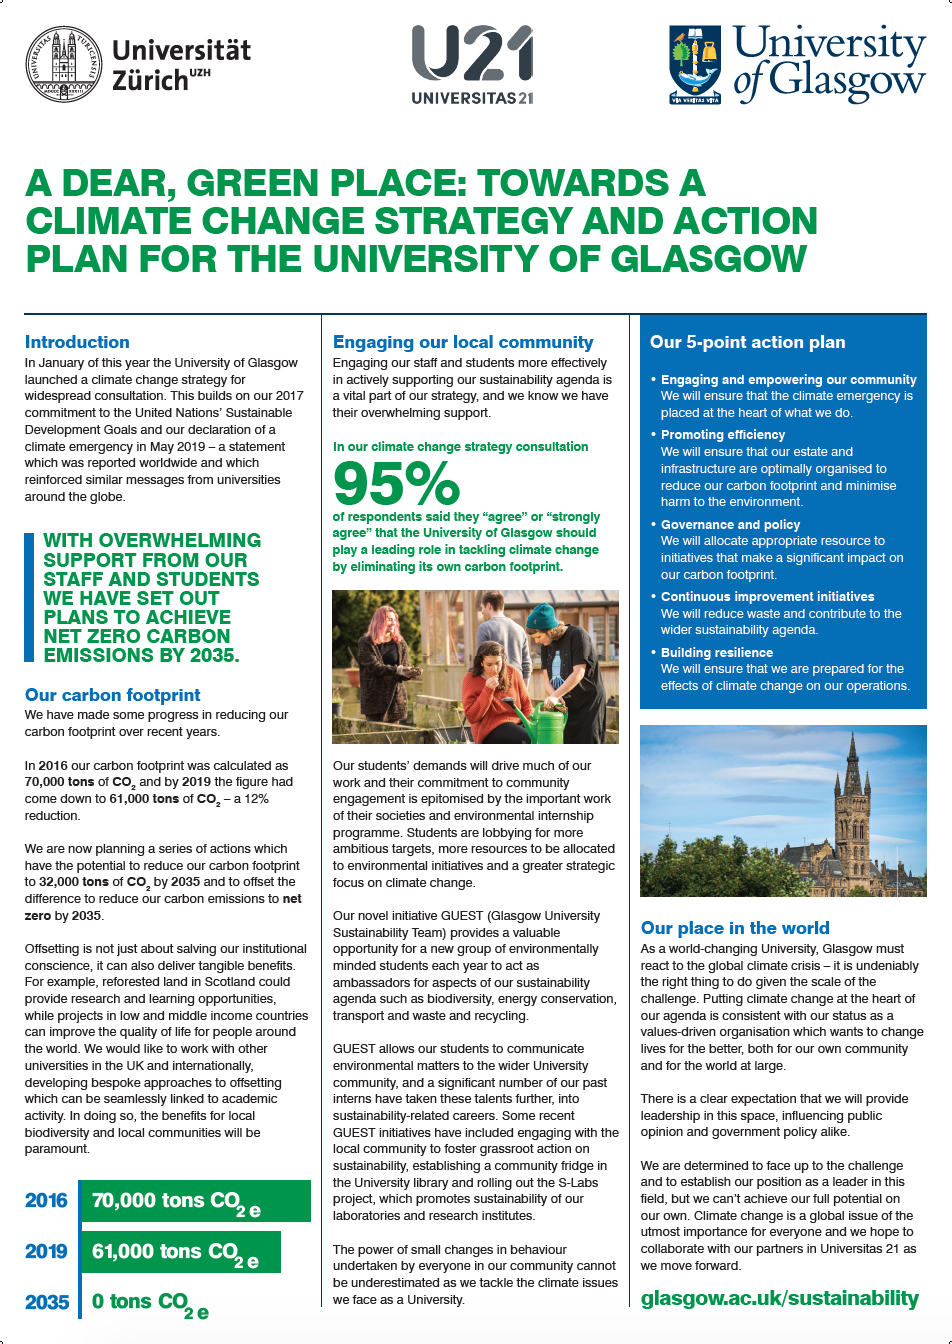 A Dear, Green Place: Towards a Climate Change Strategy and Action Plan for the University of Glasgow - David Duncan, Daniel Haydon